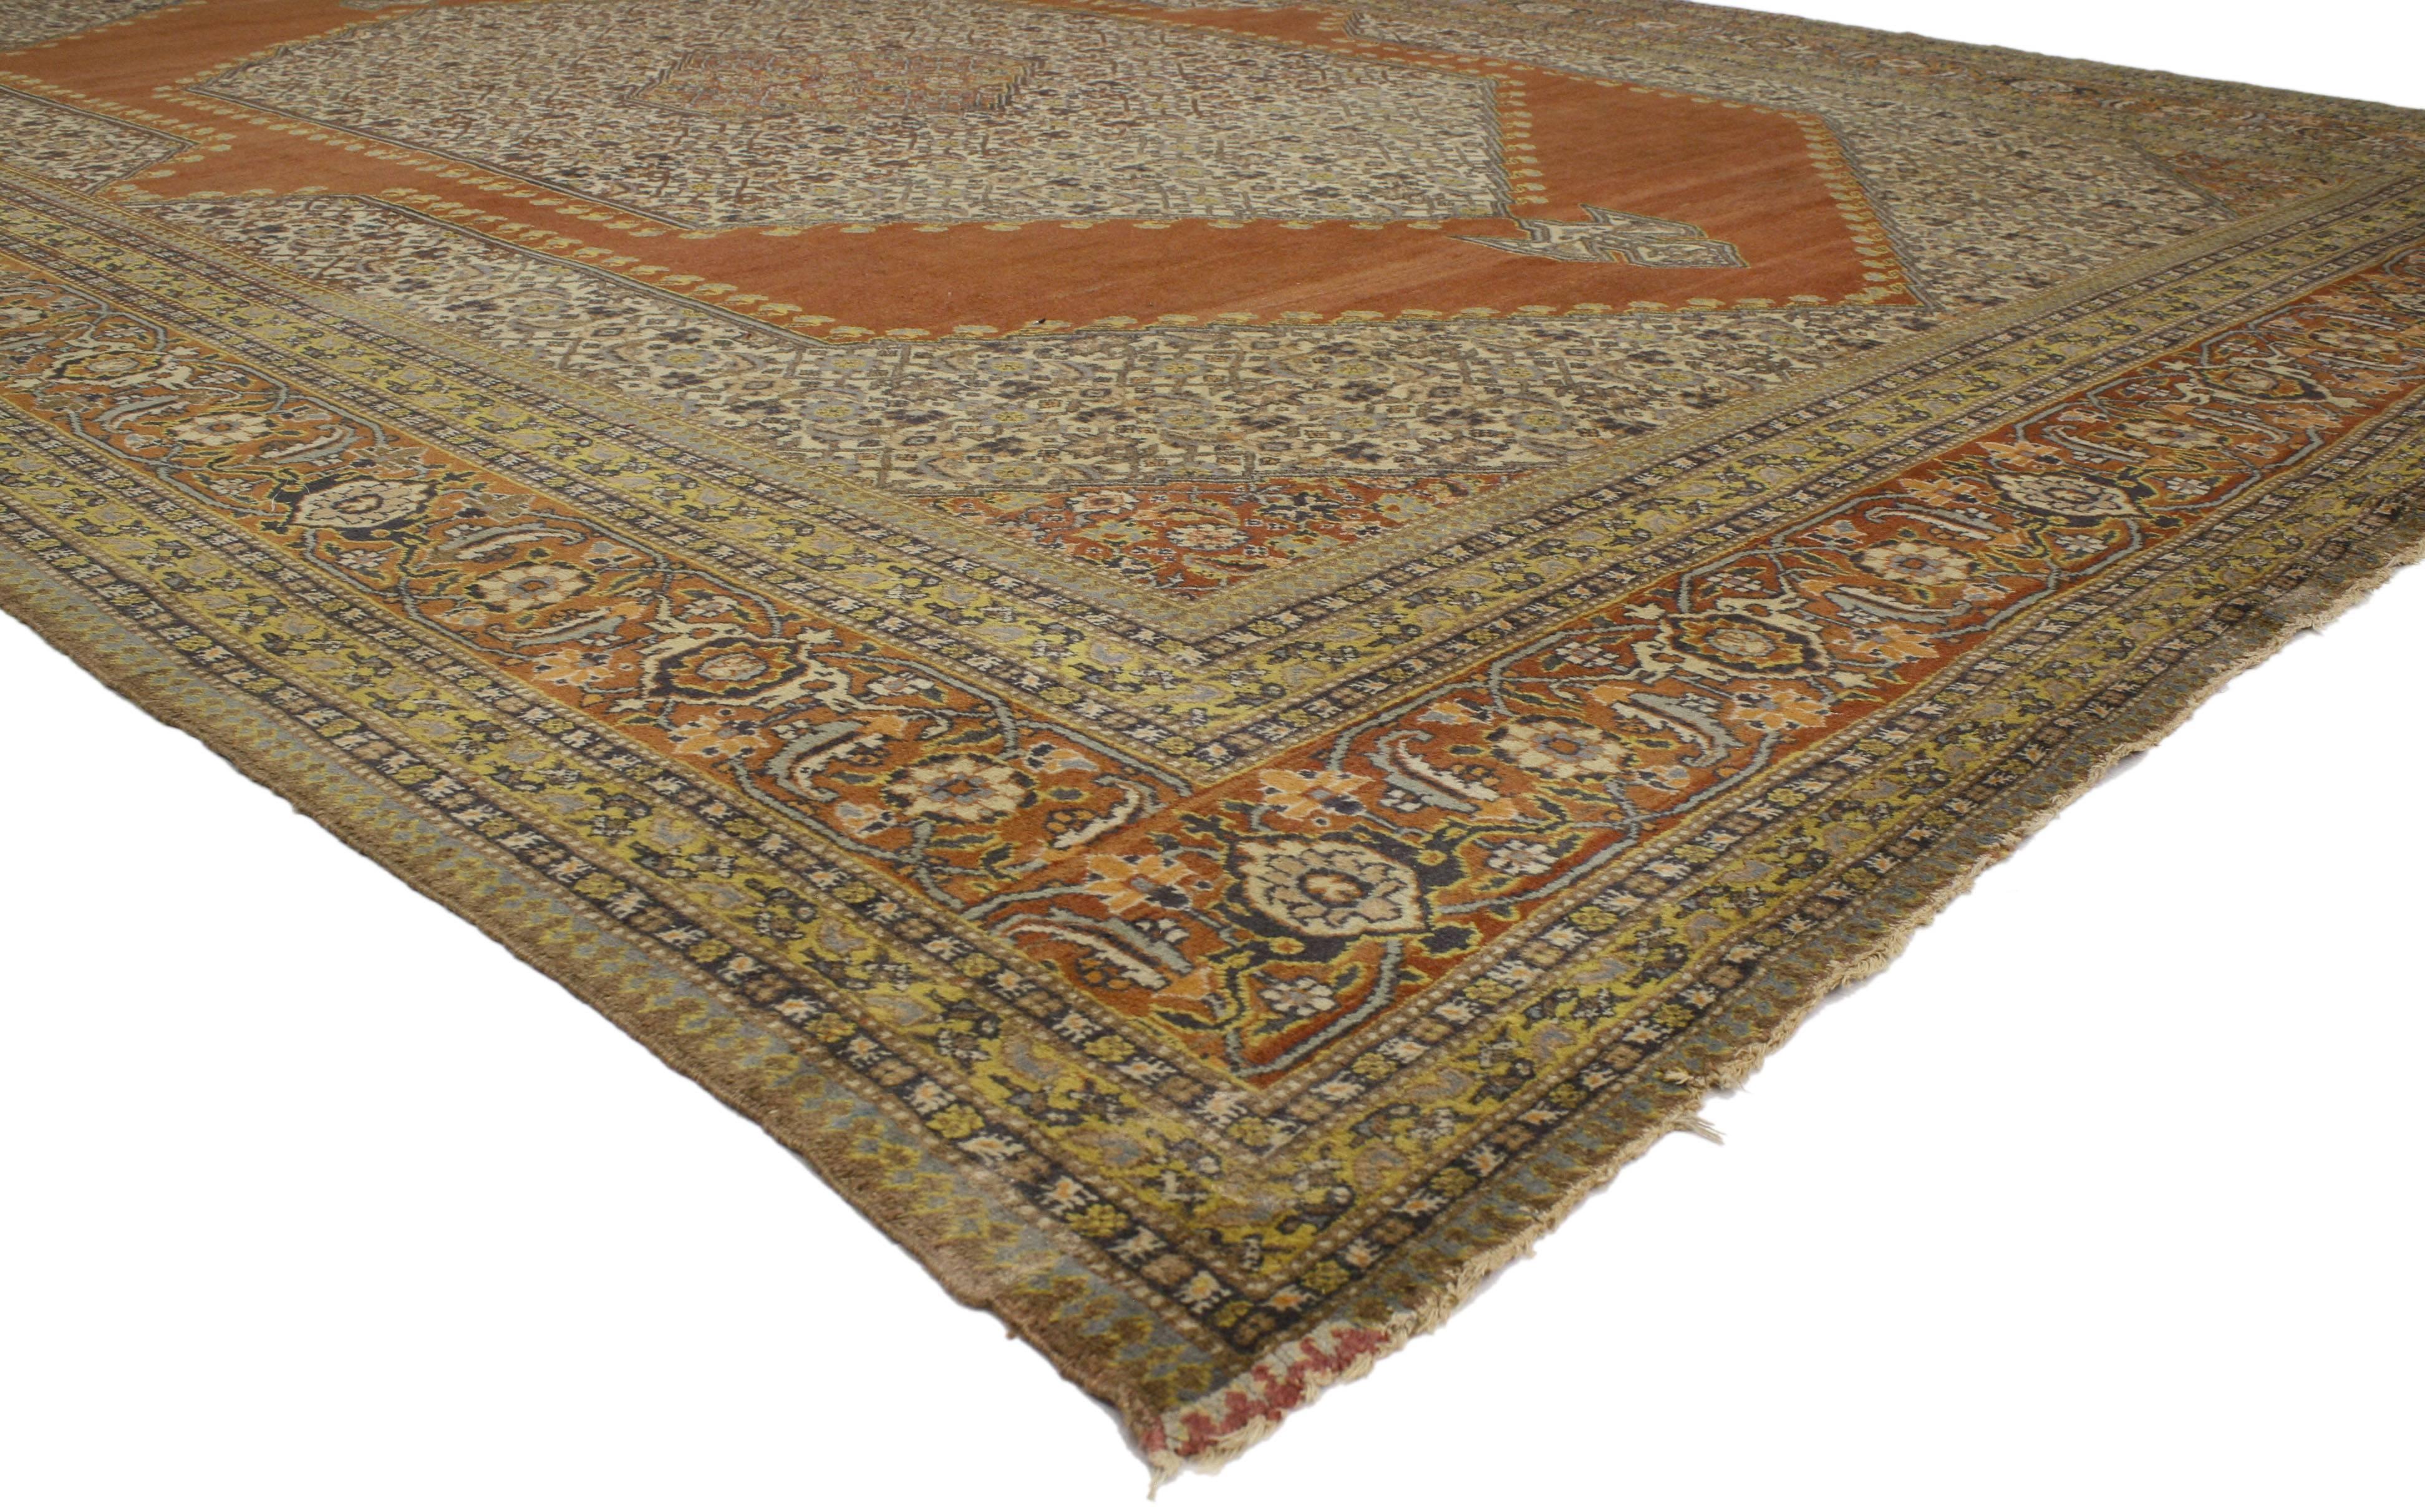 77050 Haji Khalili Antique Persian Tabriz Rug with Modern Rustic Spanish Style 11'04 x 15'09. Warm and inviting, this hand-knotted wool Haji Khalili antique Persian Tabriz rug beautifully embodies a modern rustic Spanish style. The field features a